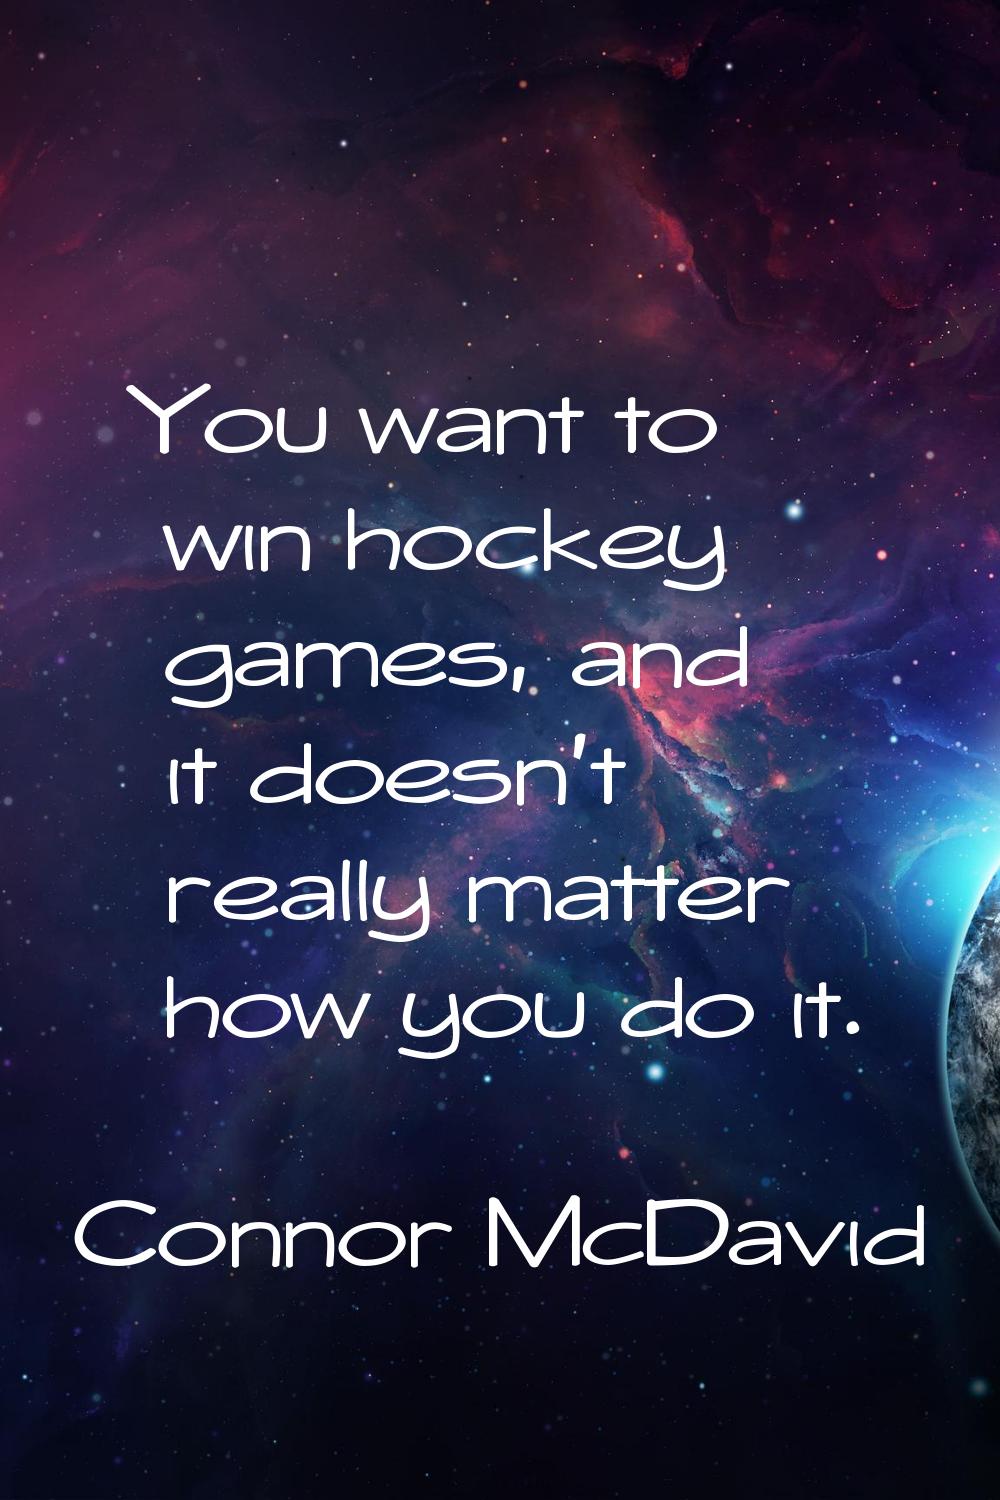 You want to win hockey games, and it doesn't really matter how you do it.